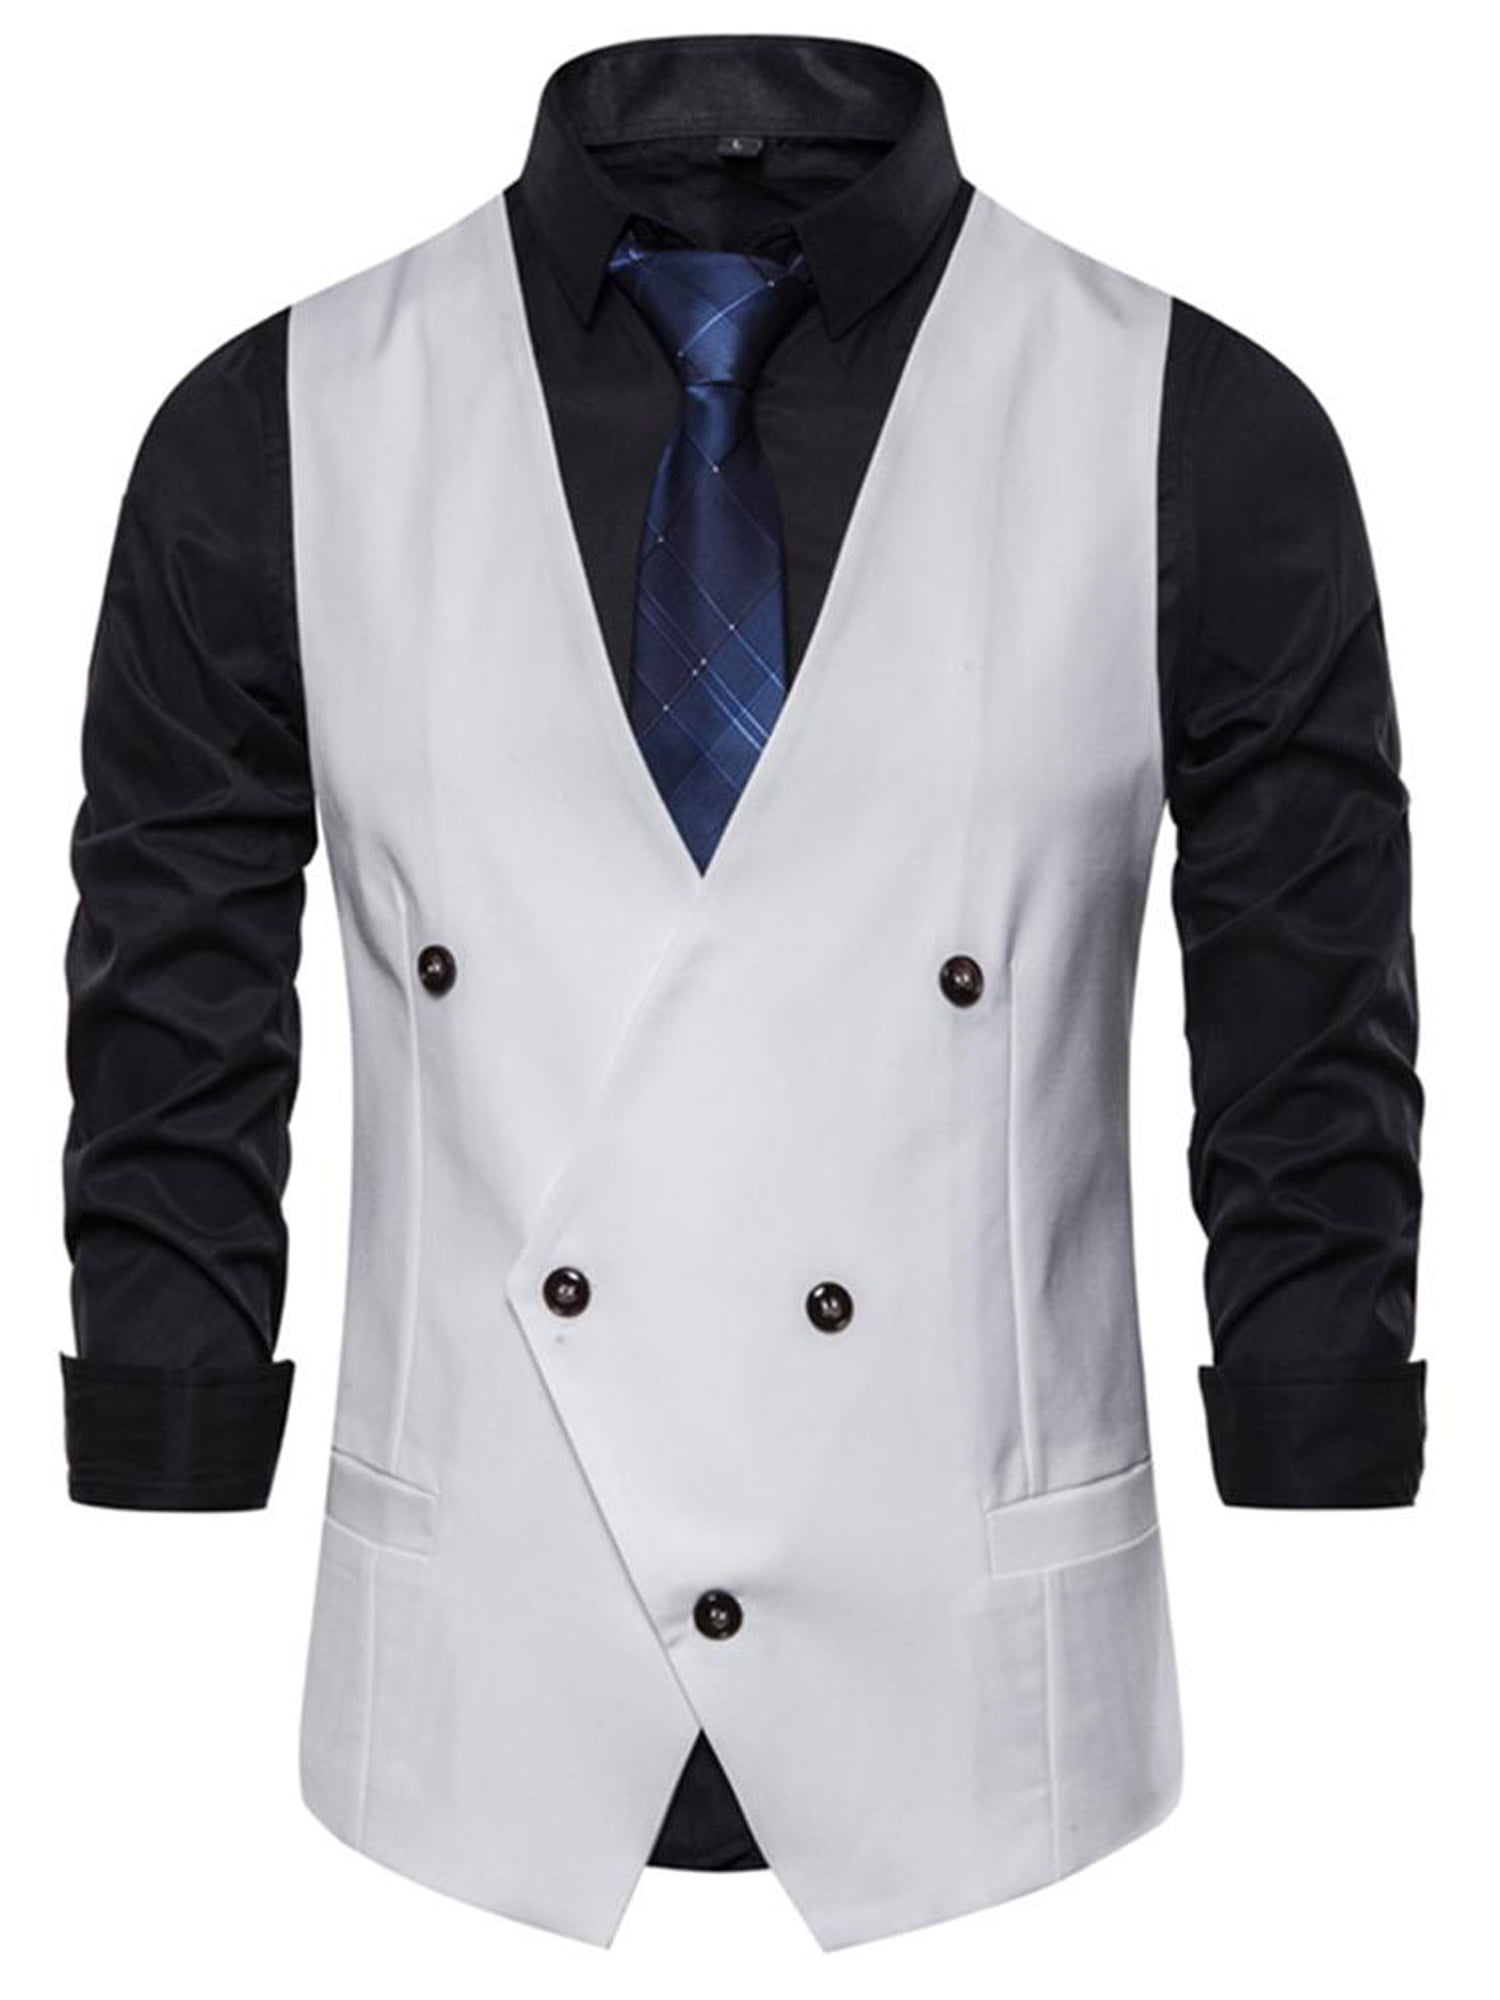 UPAIRC Mens Double-Breasted Vest Sleeveless Slim Fit Waistcoat